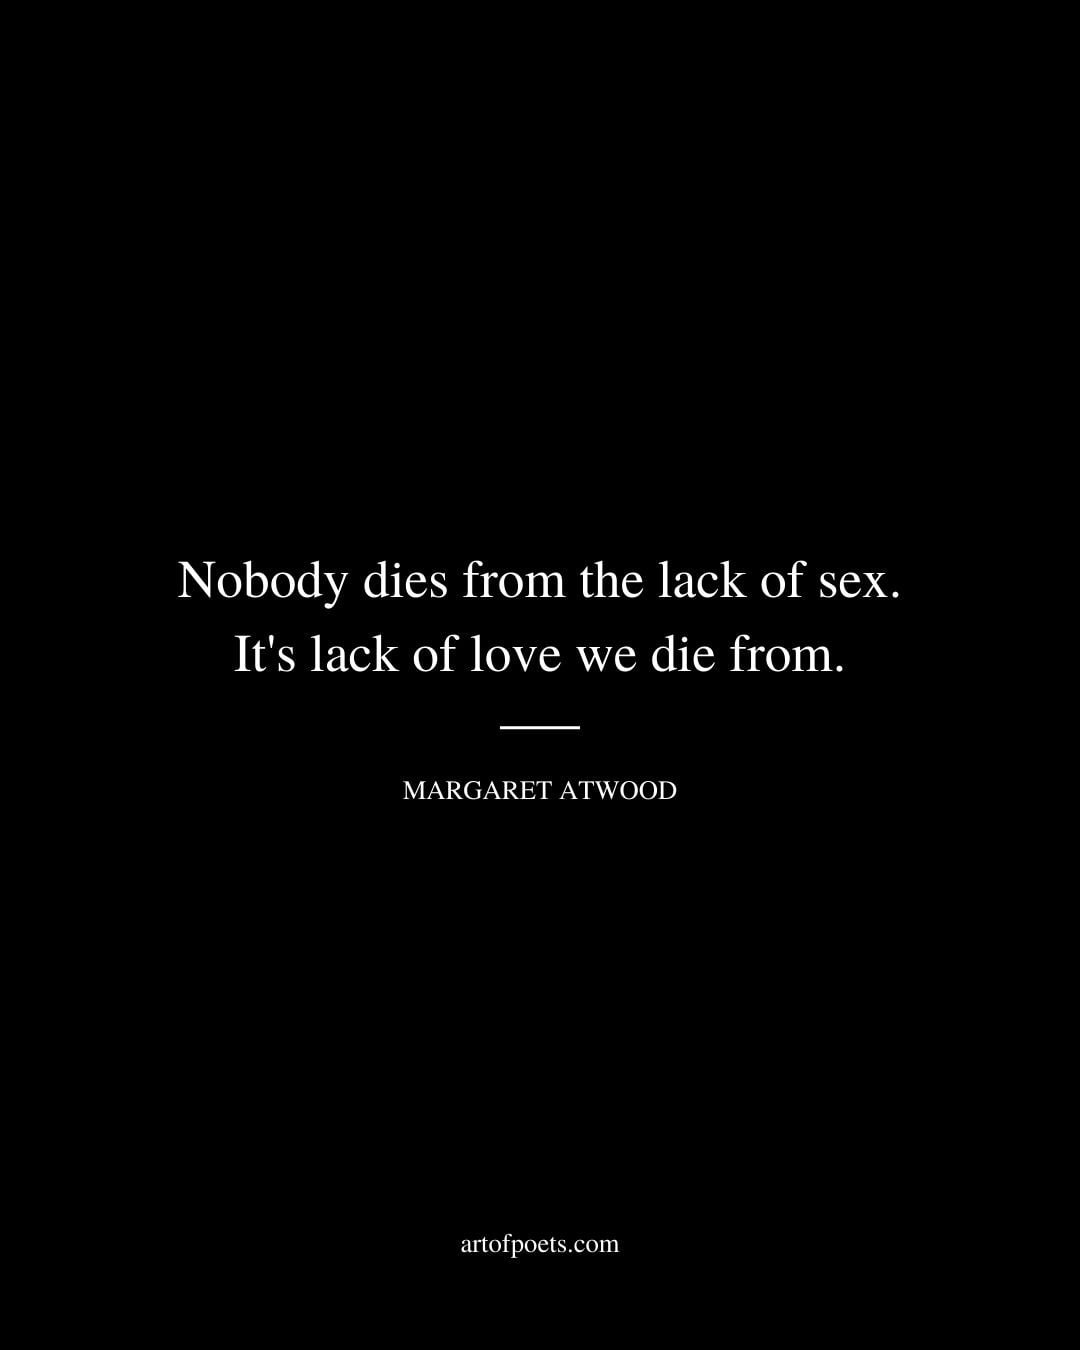 Nobody dies from the lack of sex. Its lack of love we die from